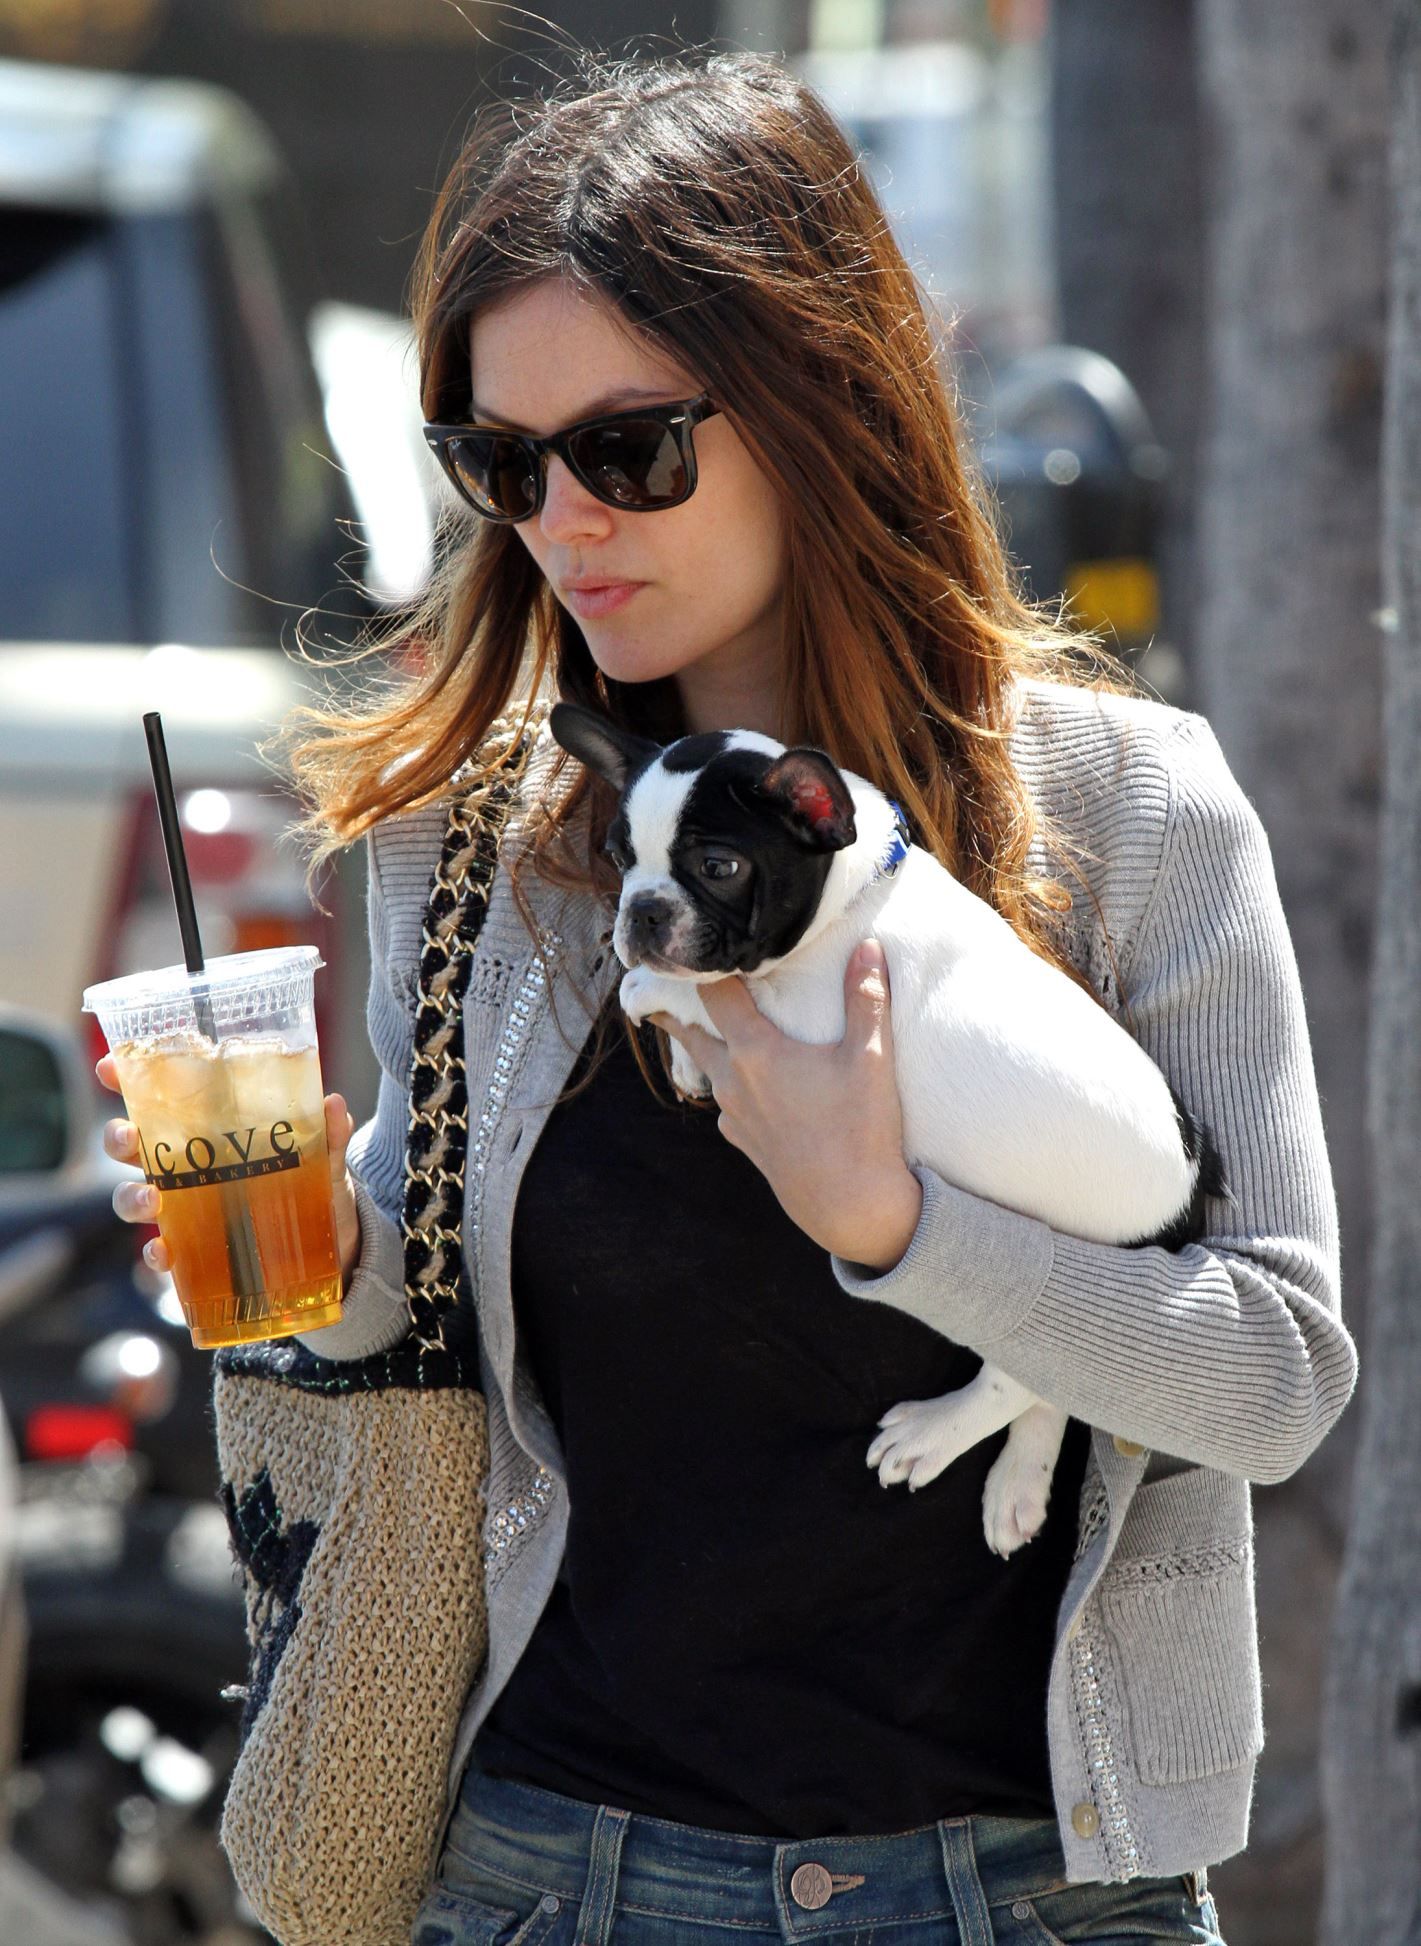 Rachel Bilson walking in the street while holding a coffee and her French Bulldog puppy